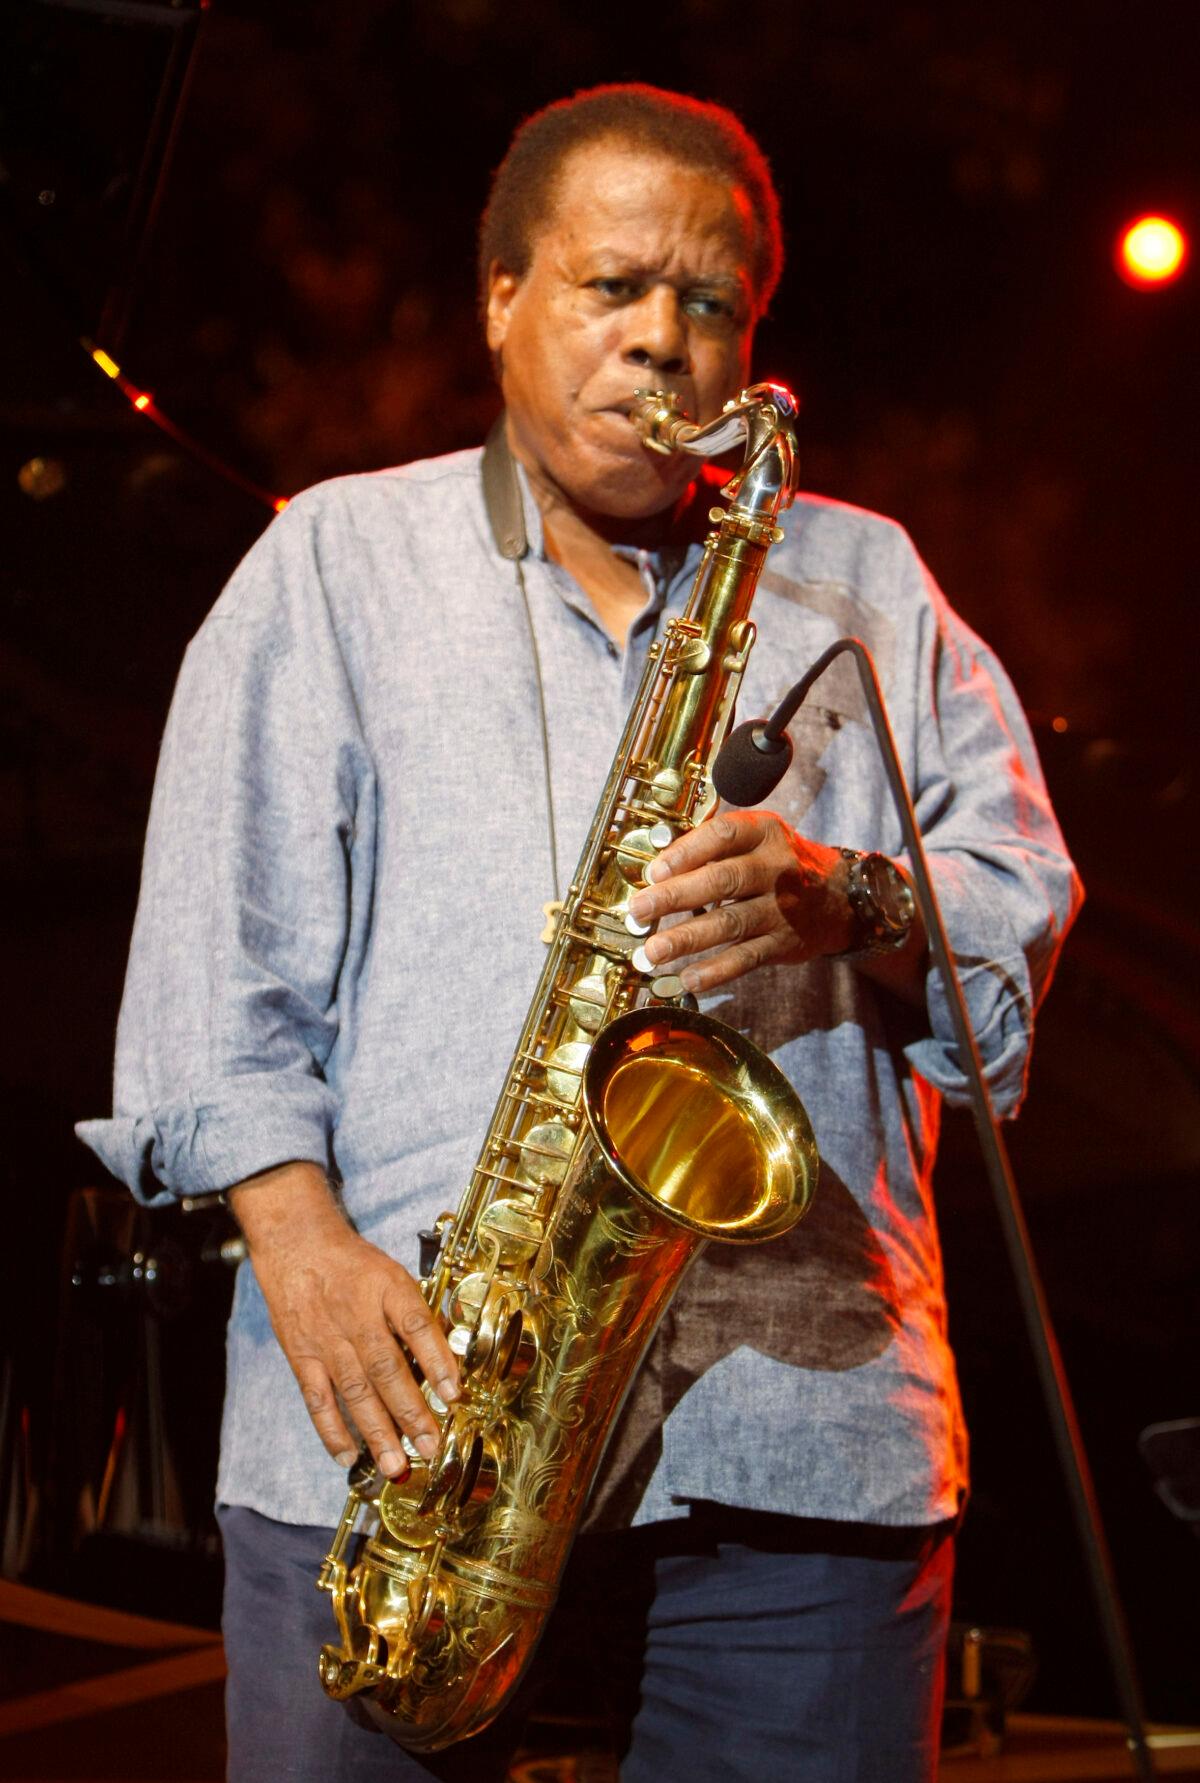 Jazz saxophonist Wayne Shorter performs at the 5 Continents Jazz Festival in Marseille, southern France, on July 23, 2013. (Claude Paris/AP Photo)